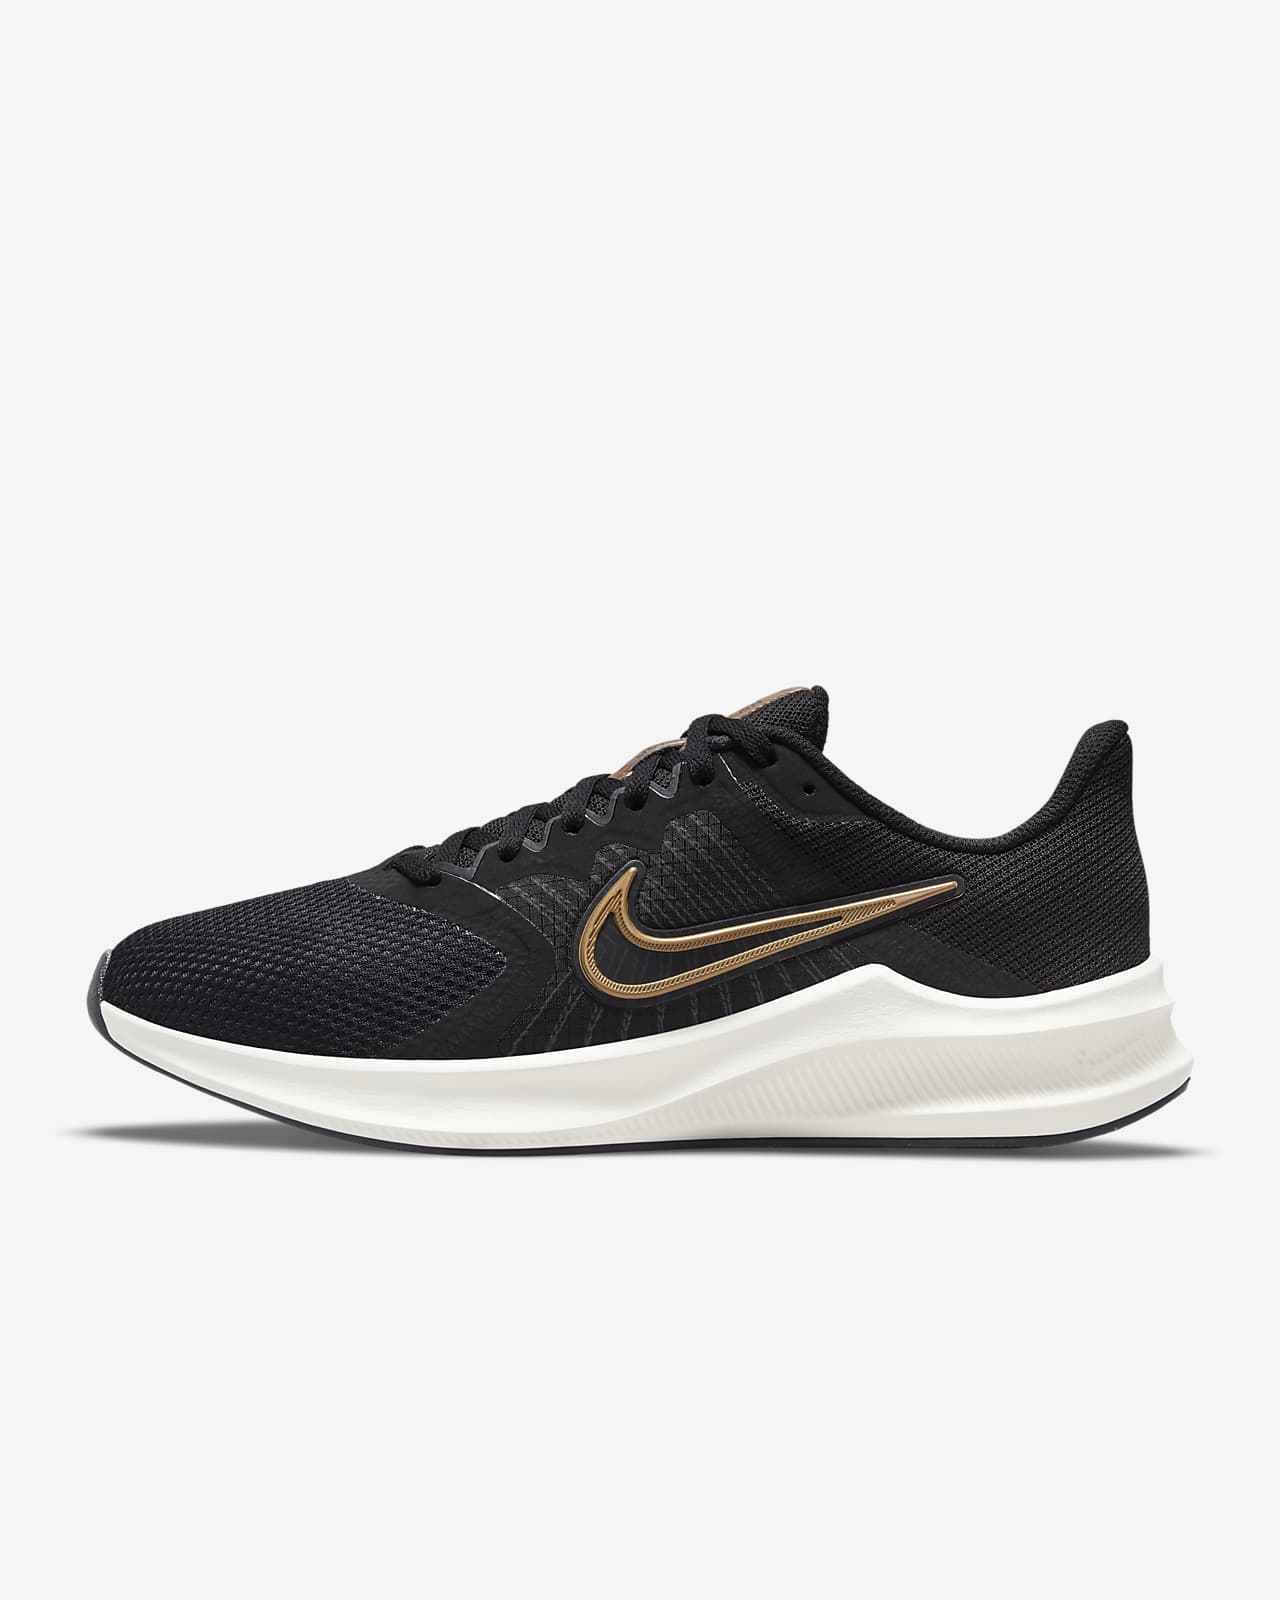 chaussures course femme nike